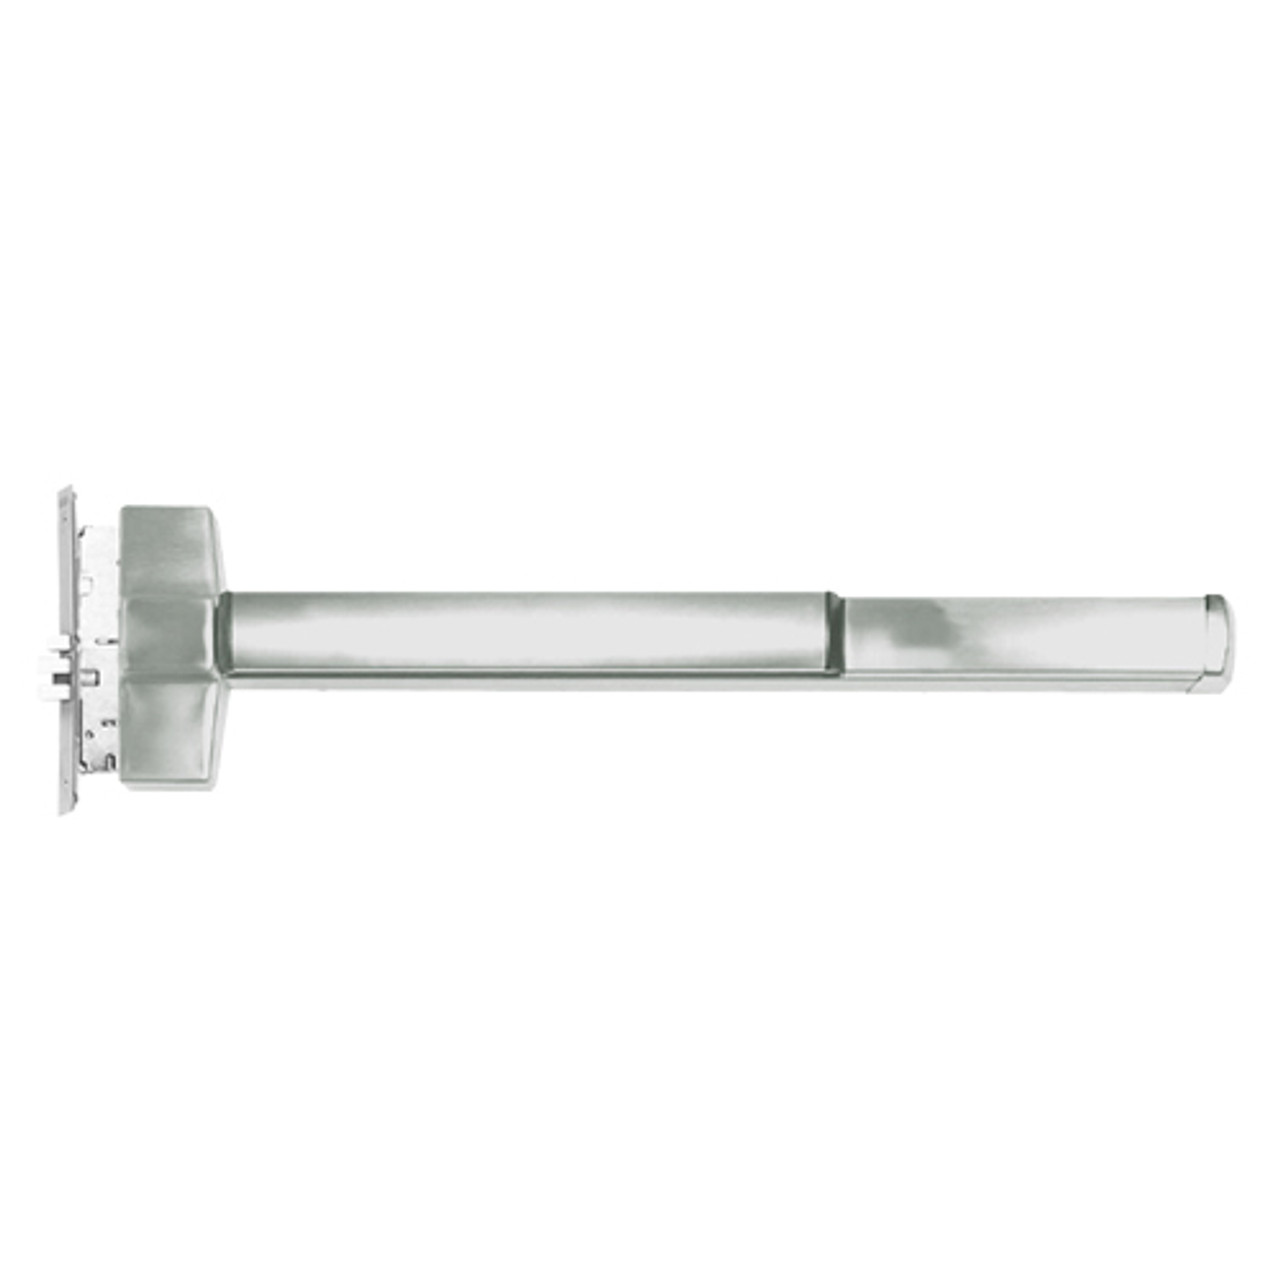 ED5600ATD-619-LHR Corbin ED5600 Series Fire Rated Mortise Exit Device with Delayed Egress in Satin Nickel Finish